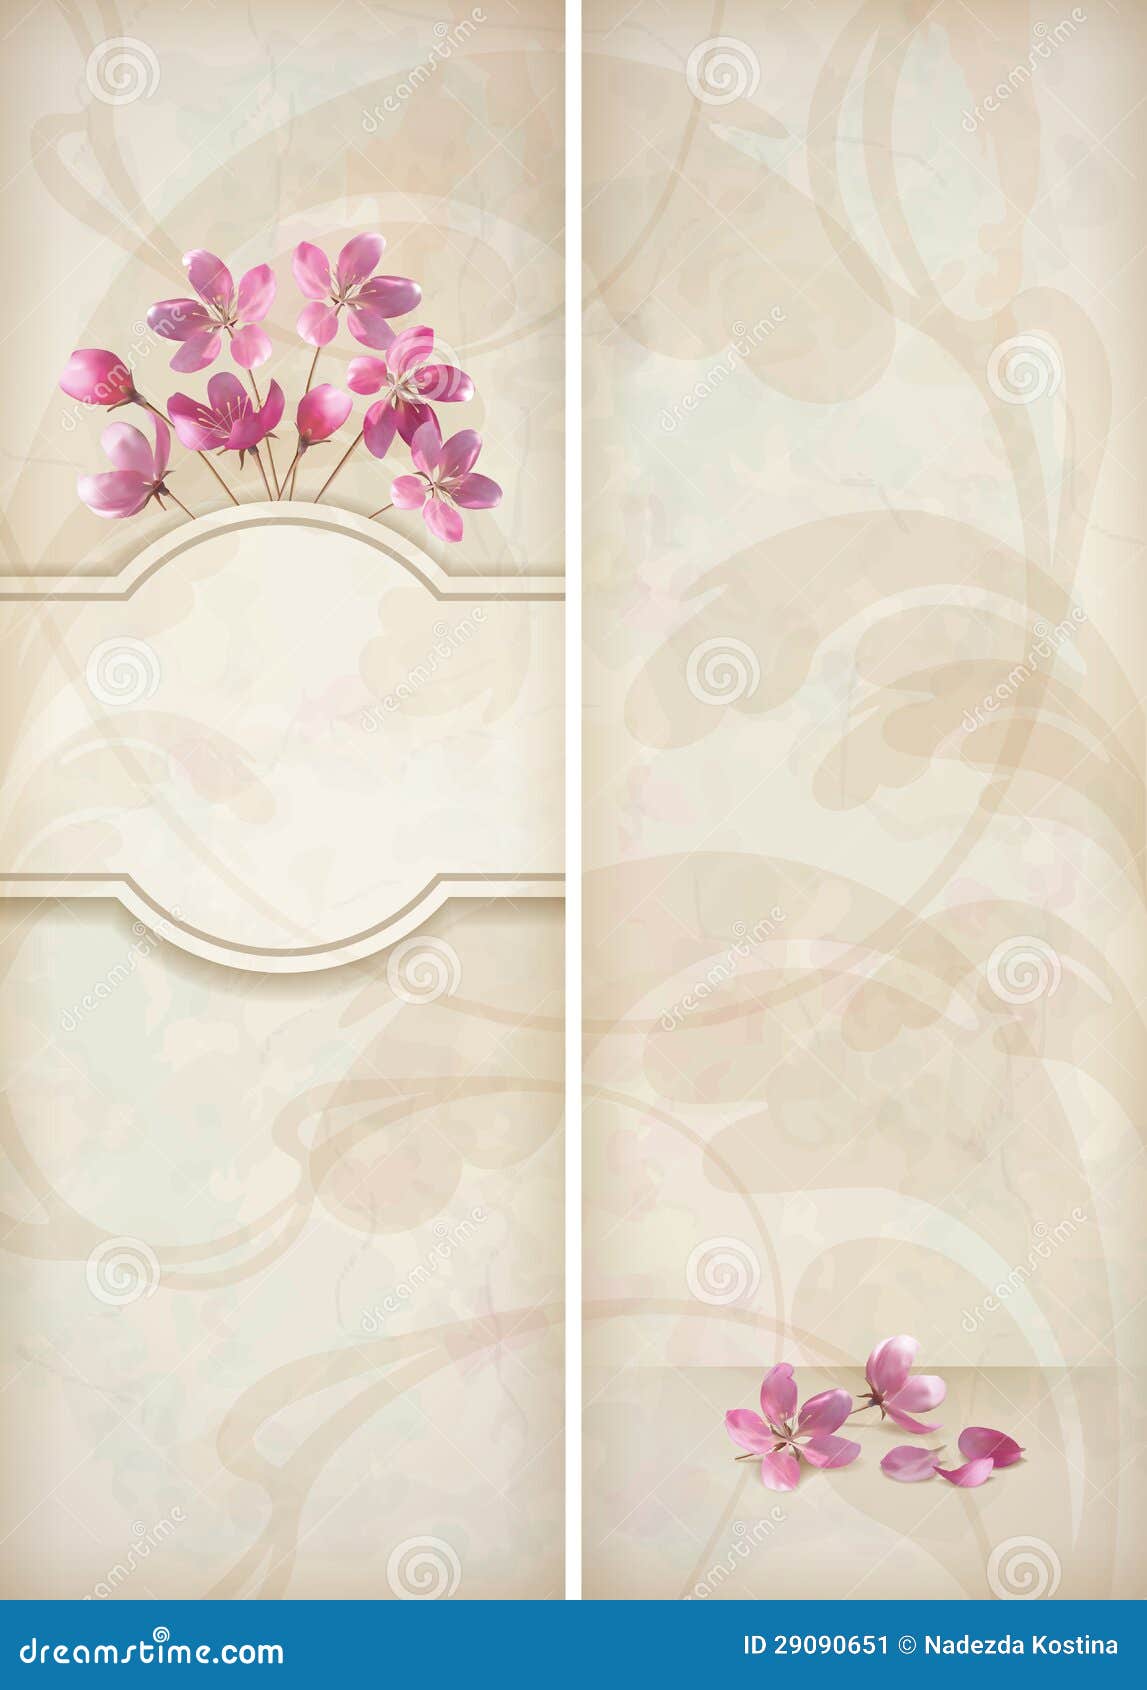 Bouquet Of Flowers Template